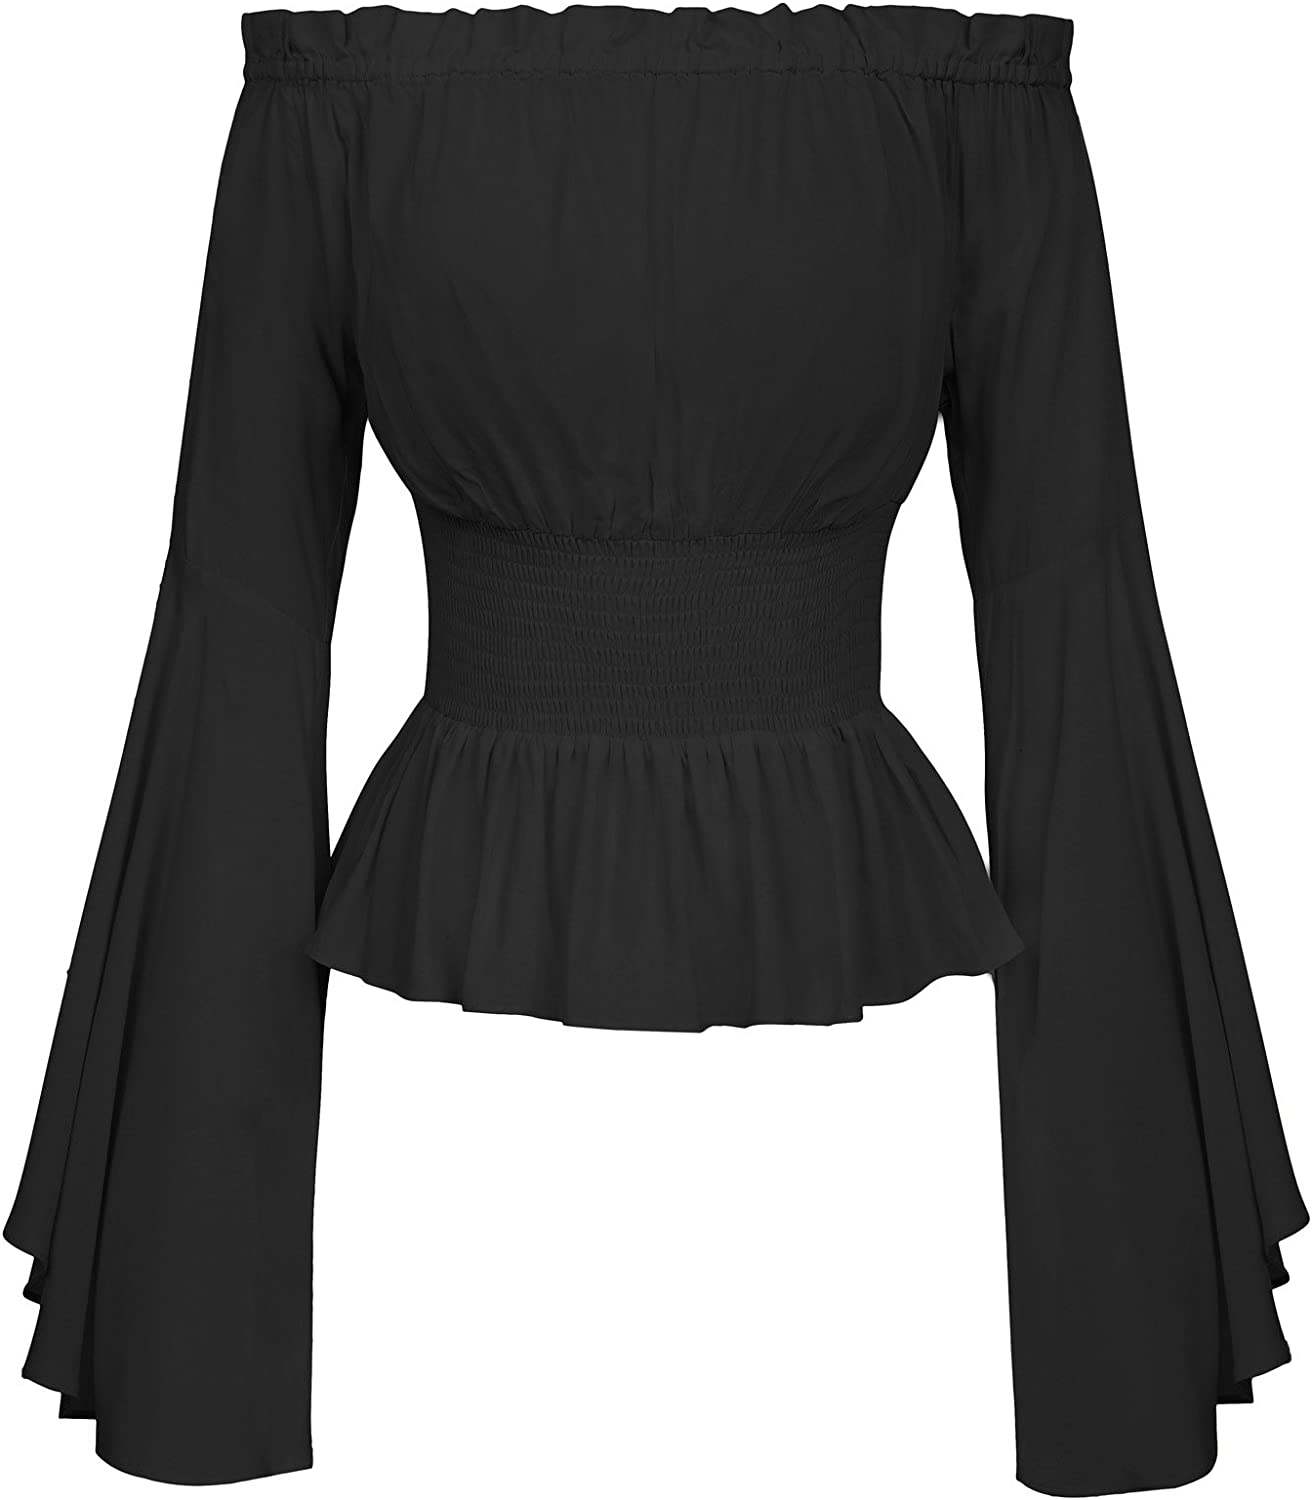 Belle Poque Womens Renaissance Gothic Blouse Bell Sleeves Ruffle